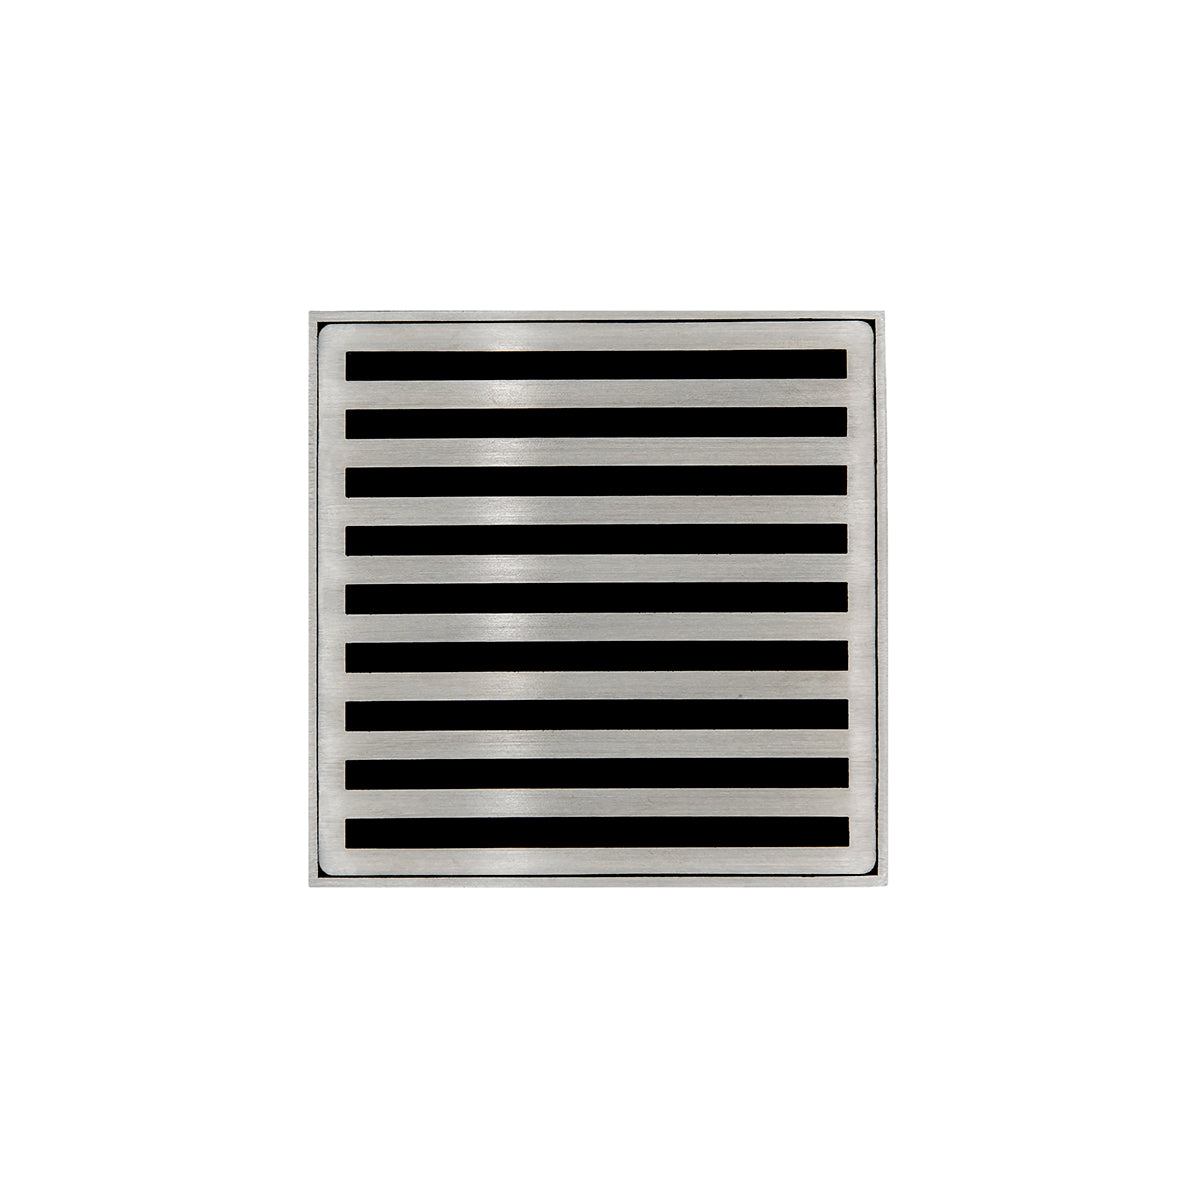 Infinity Drain 5" x 5" NDB 5 Premium Center Drain Kit with Lines Pattern Decorative Plate with PVC Bonded Flange Drain Body, 2", 3" and 4" Outlet